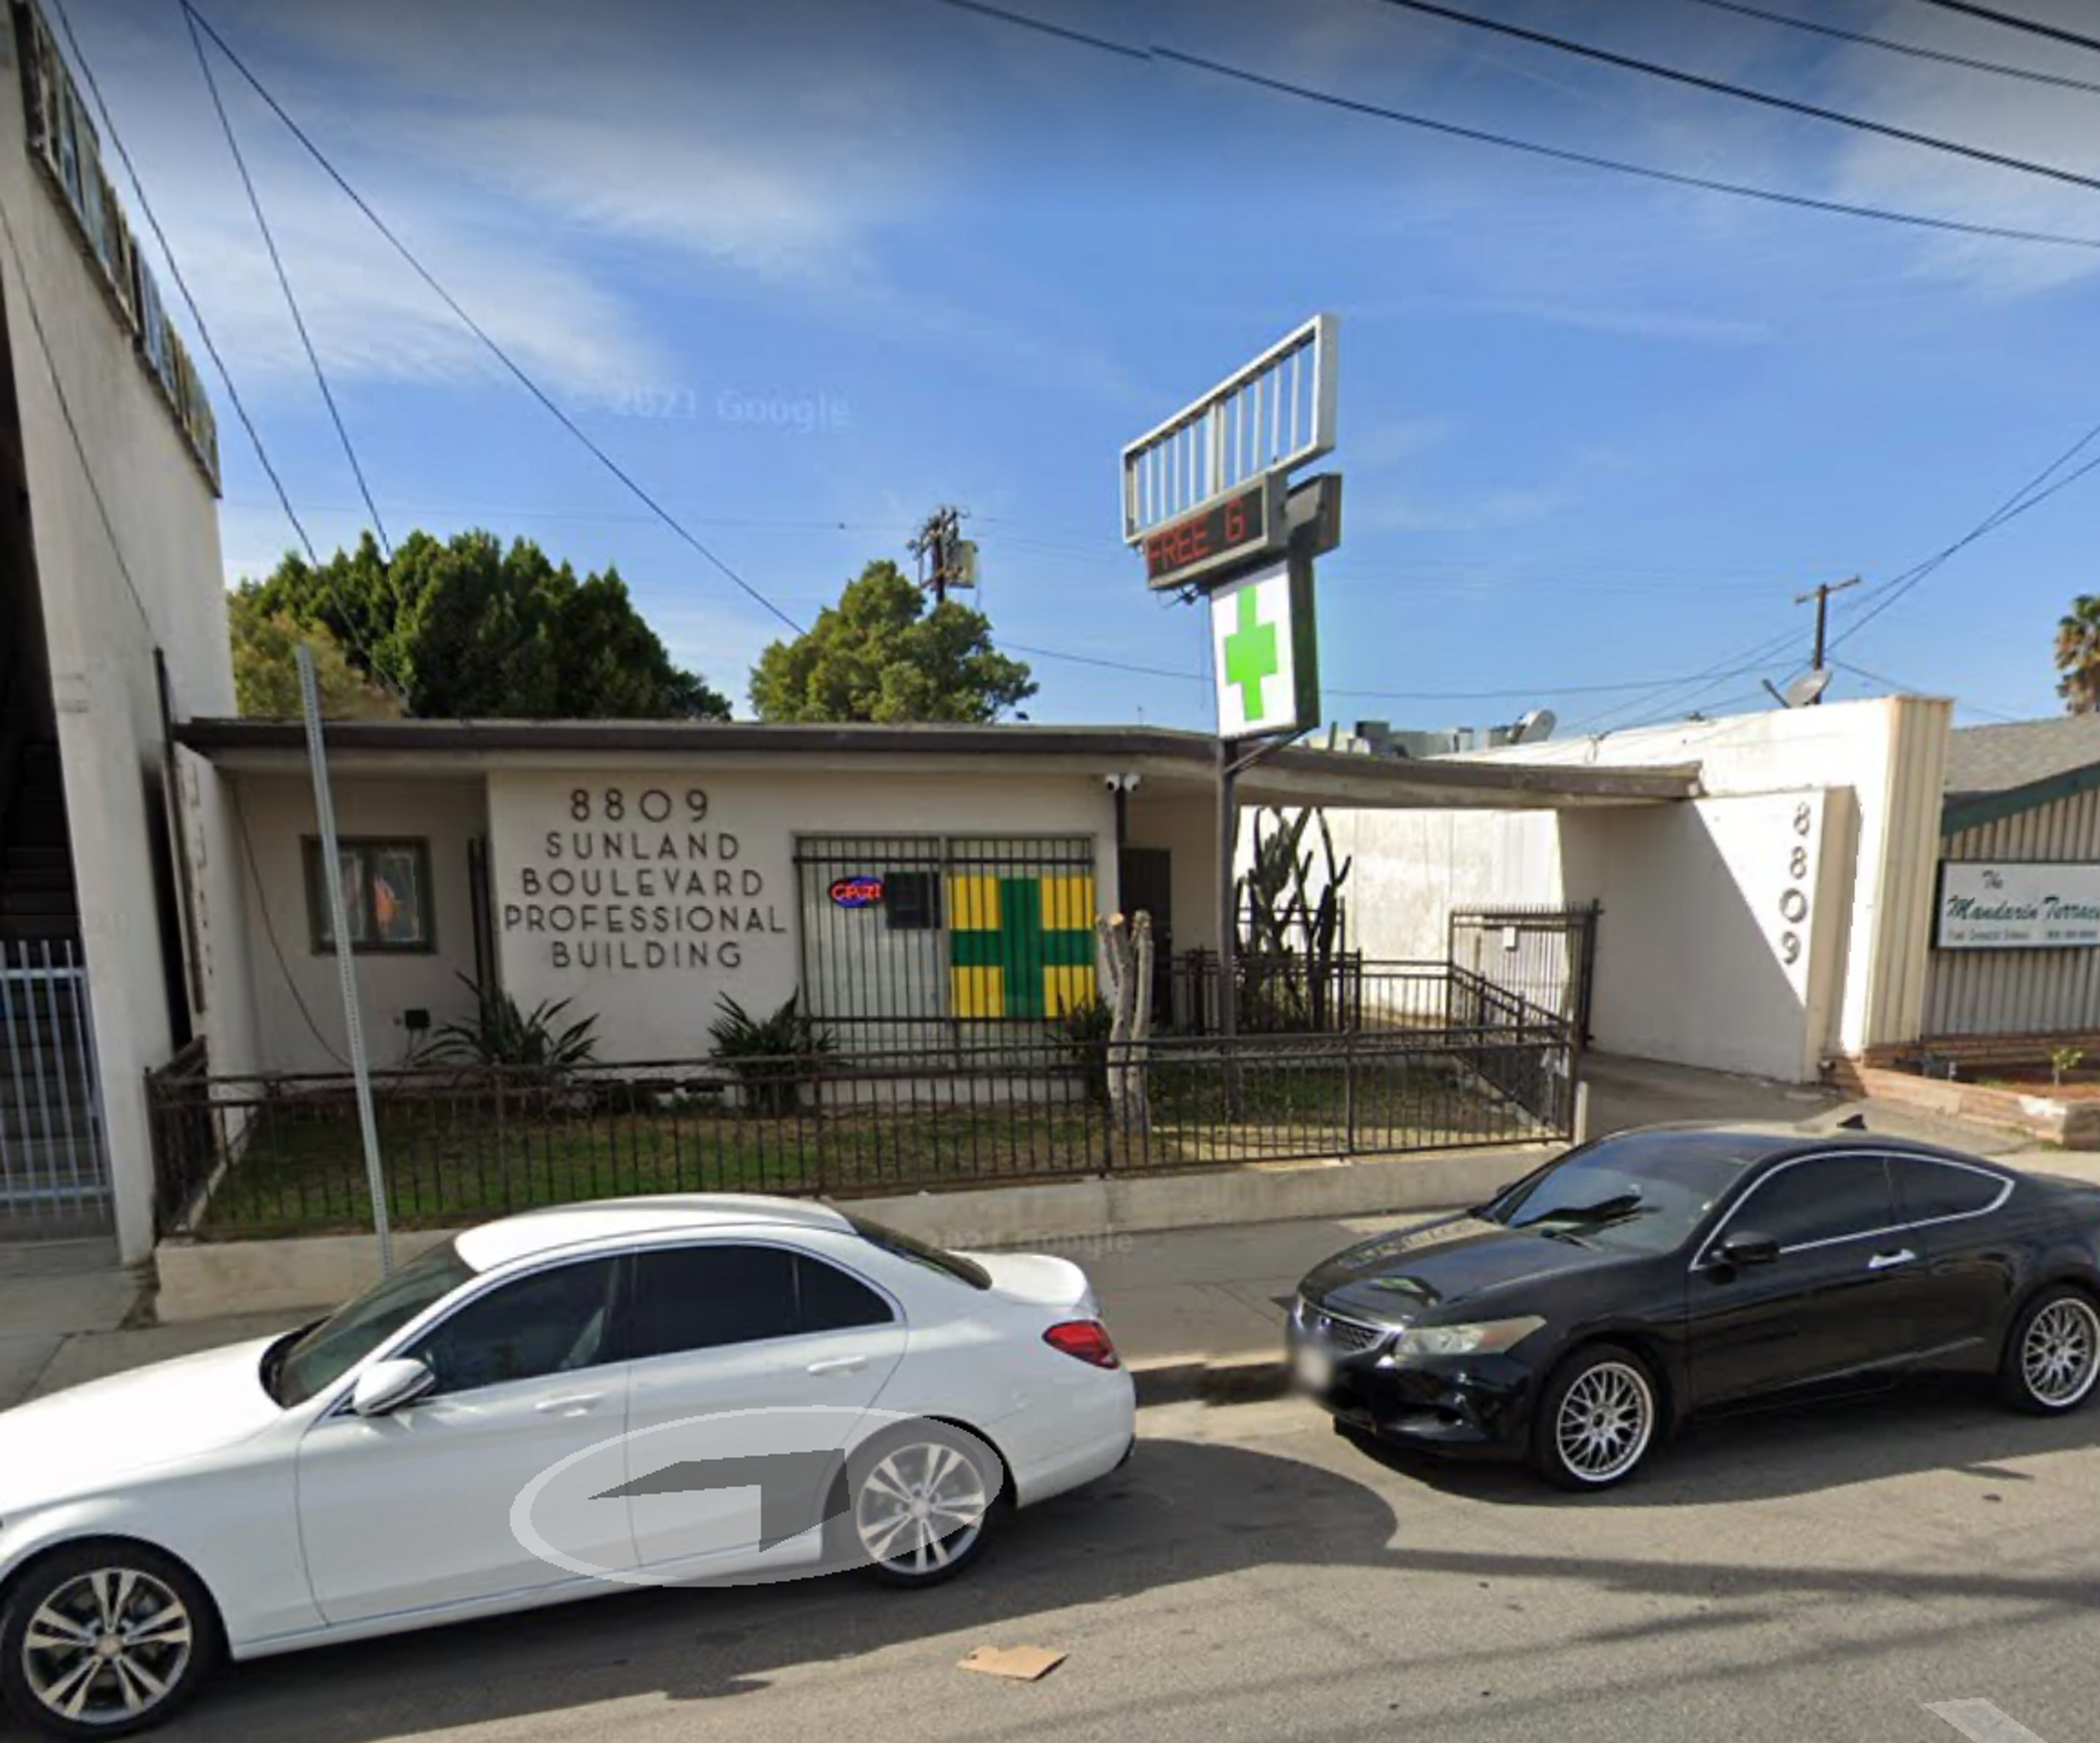 Google Street View image of 8809 Sunland Boulevard, a small Midcentury Modern doctor's office. When the picture was taken in 2021, it had been repurposed as a marijuana dispensary.